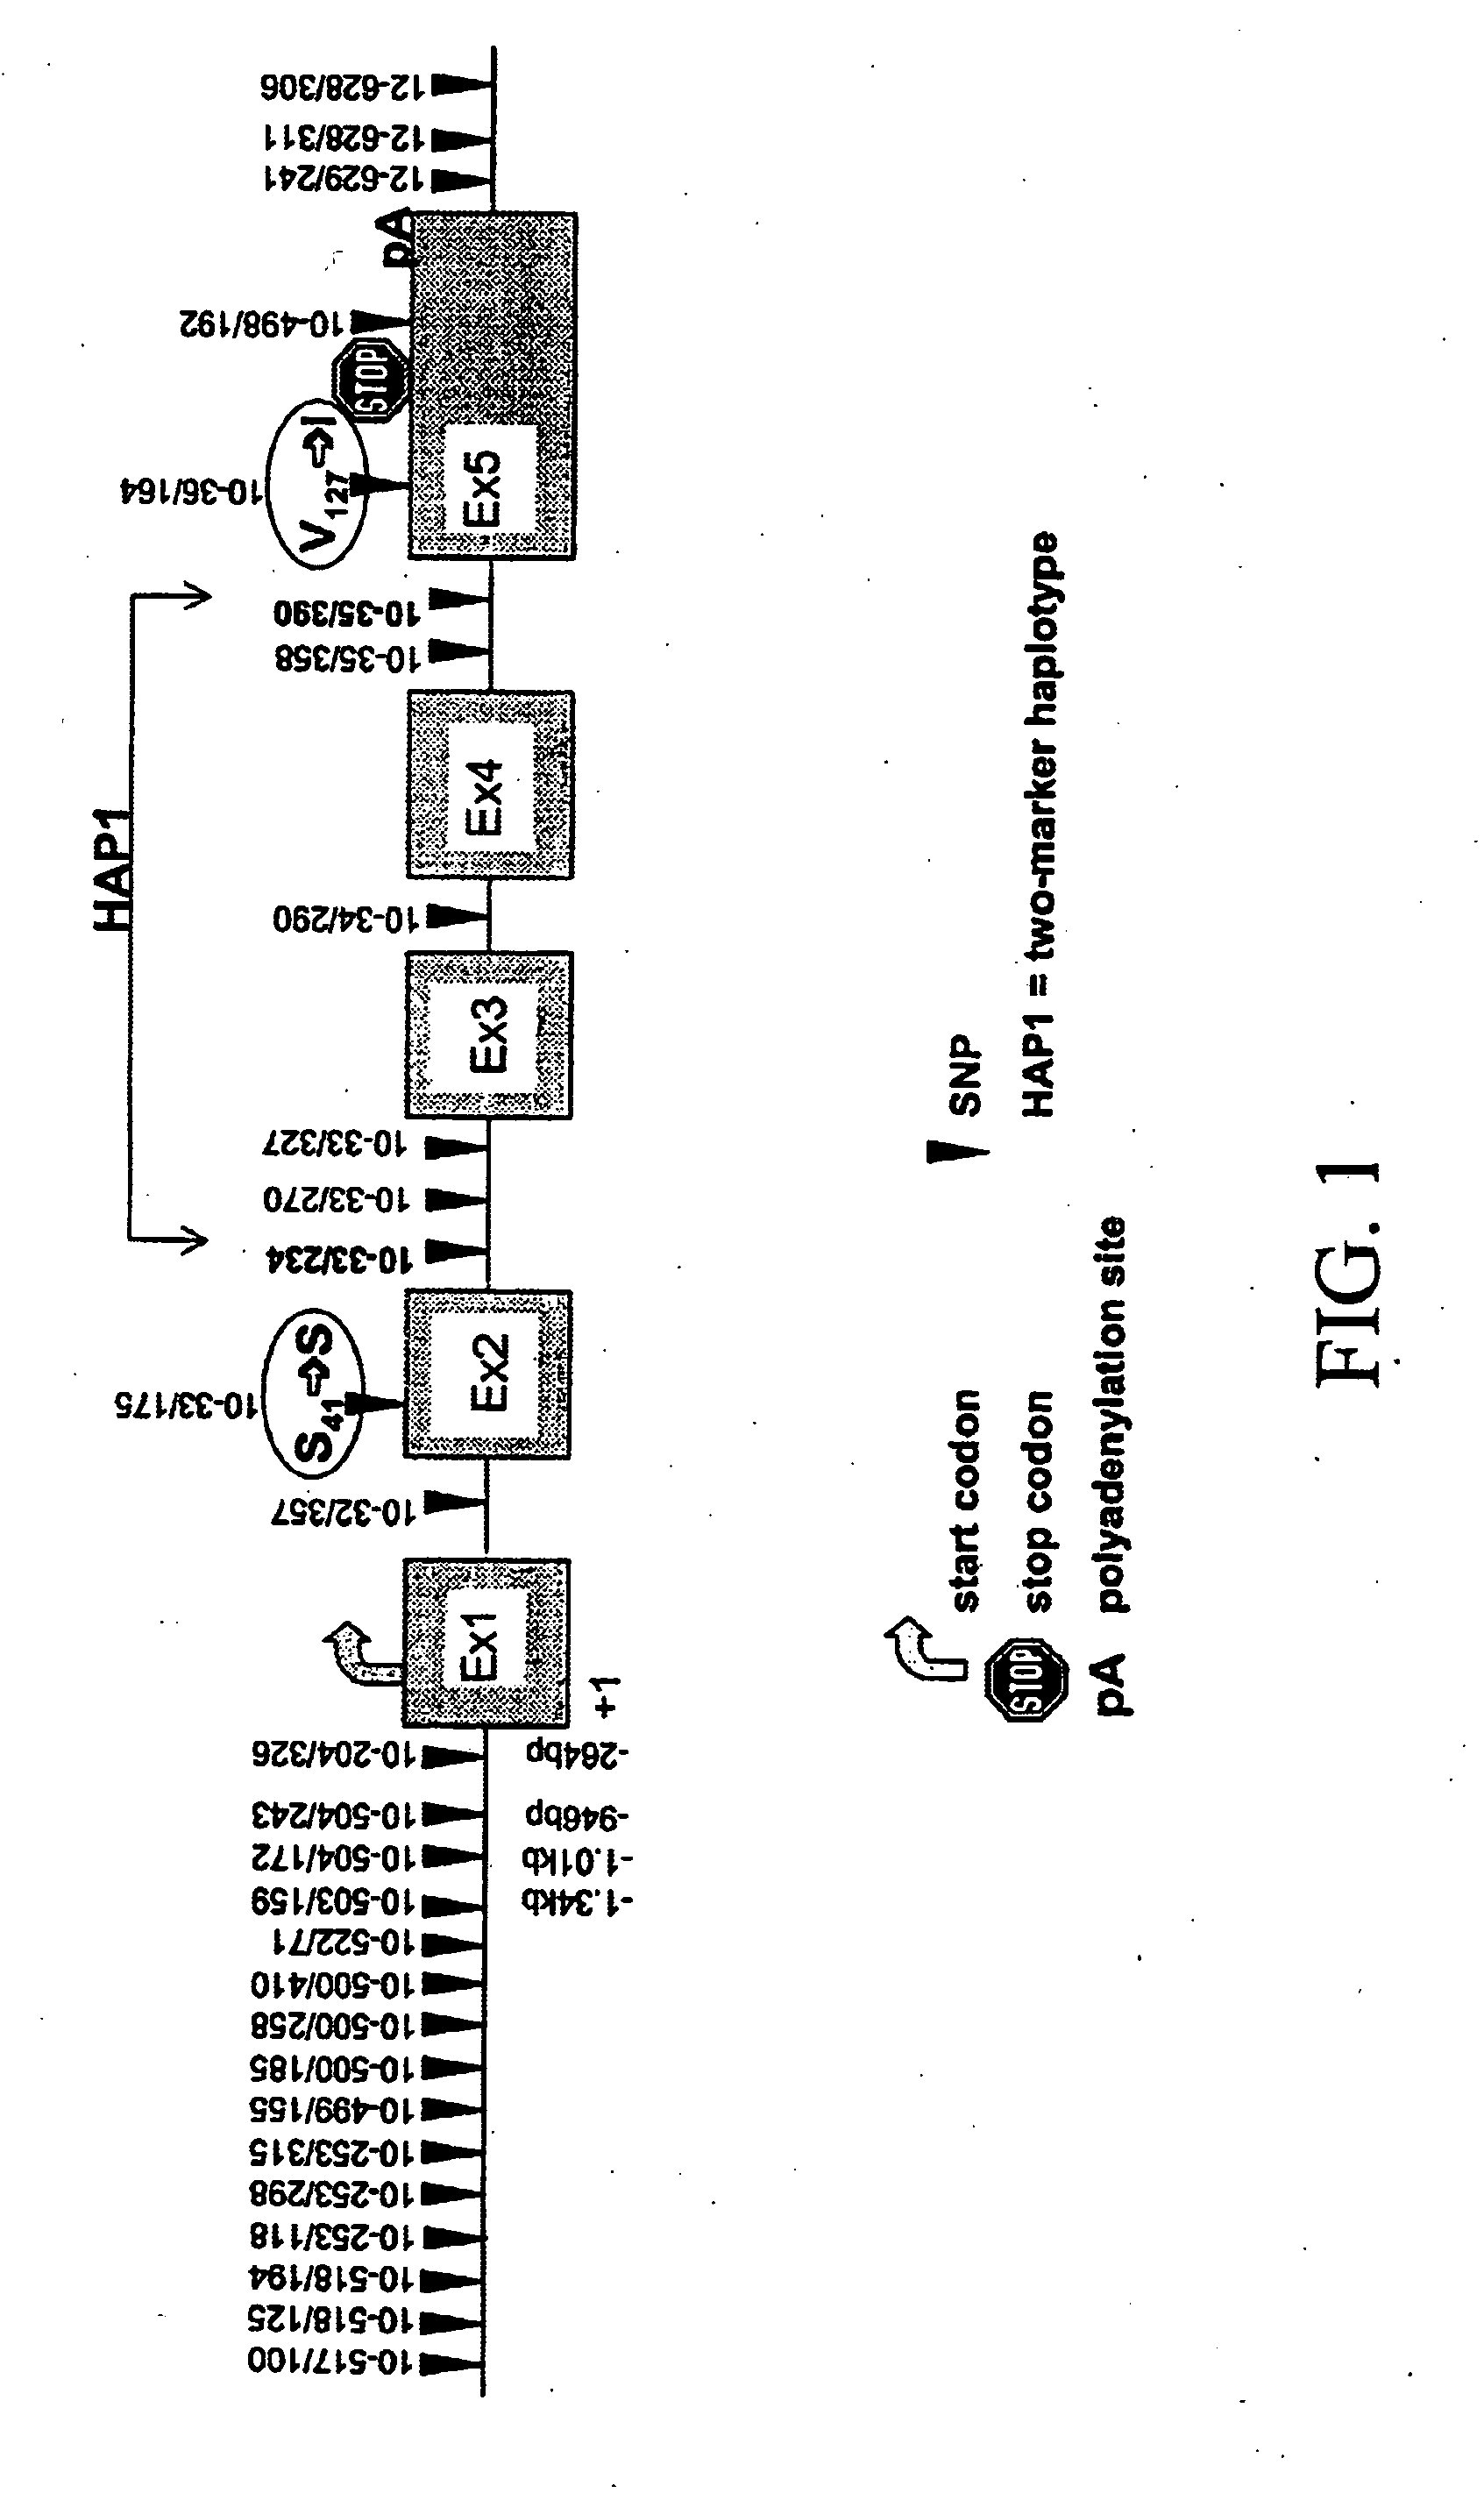 Genomic sequence of the 5-Lipoxygenase-activating protein (FLAP), polymorphic markers thereof and methods for detection of asthma